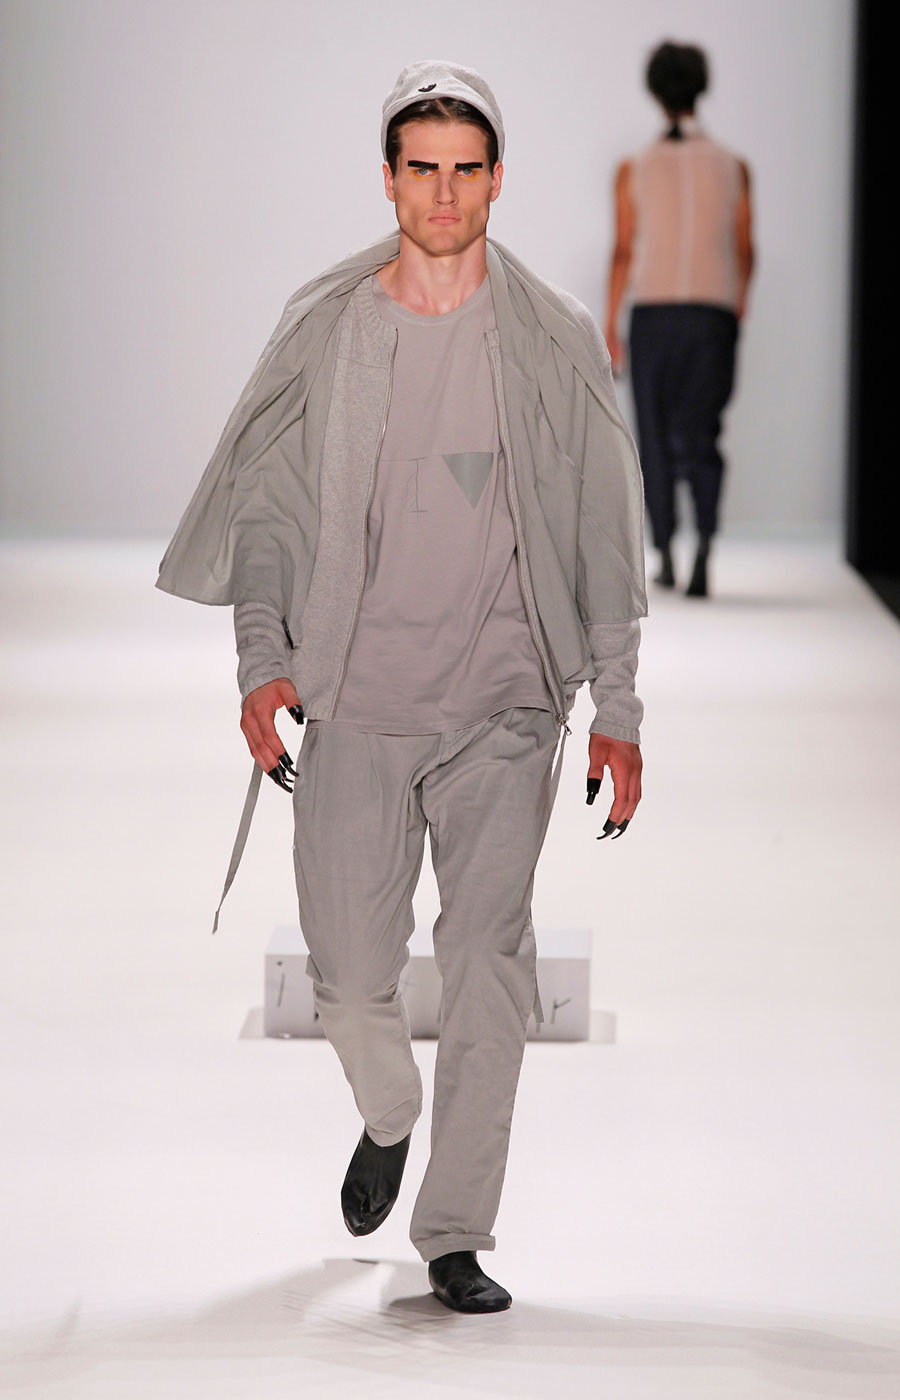 Spring/Summer 2012 by Patrick Mohr (08)